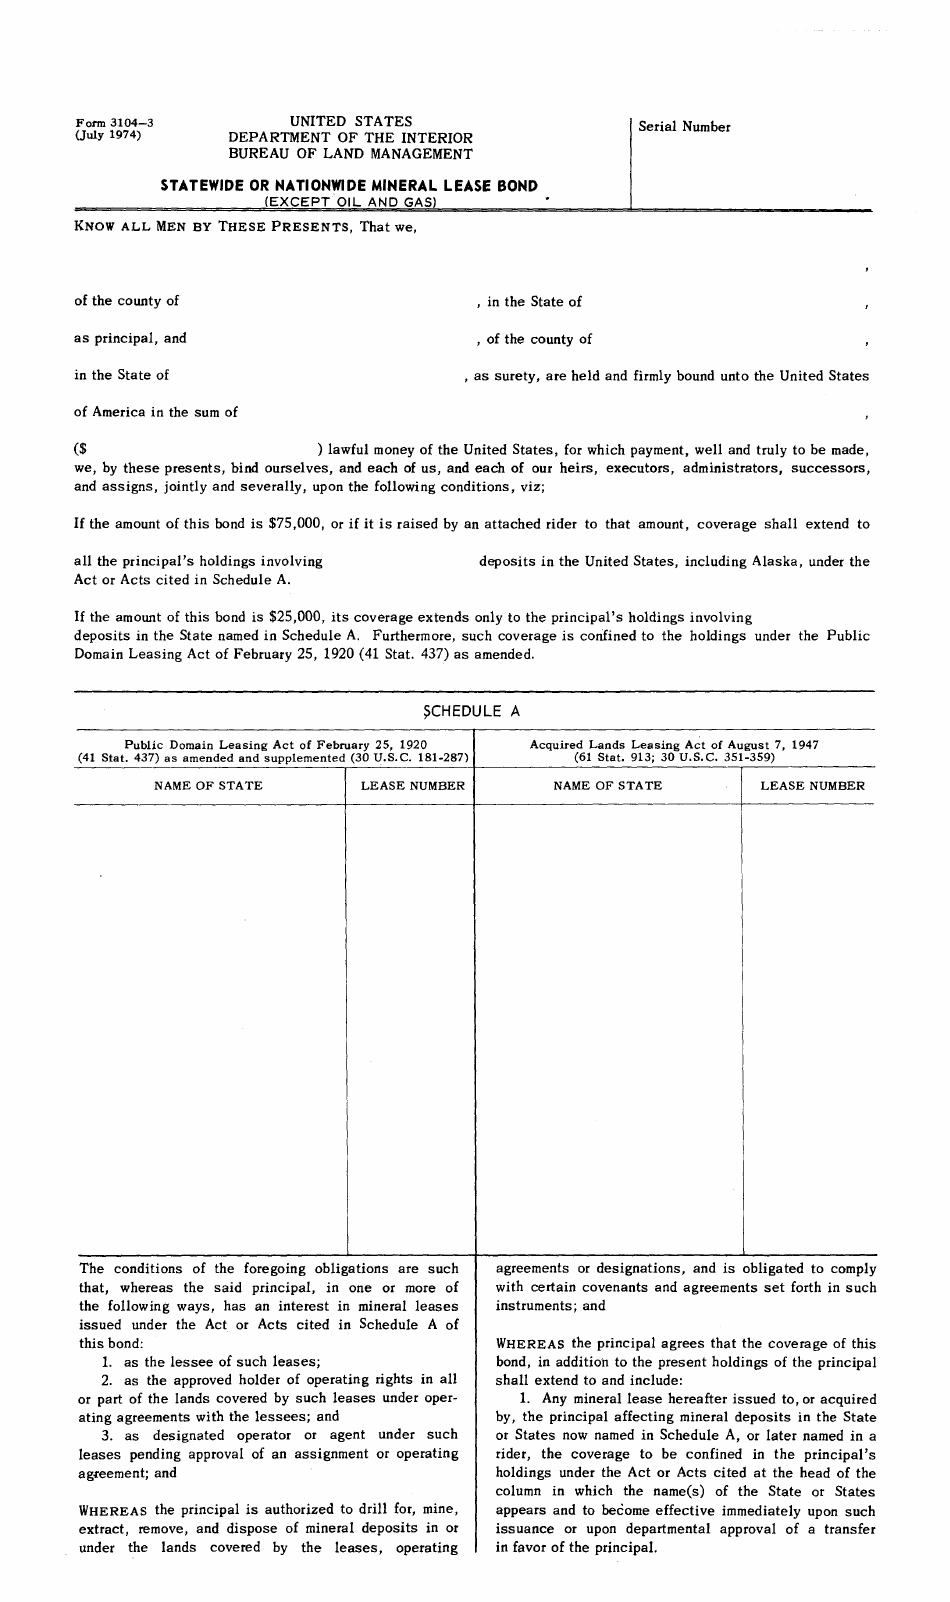 blm-form-3104-3-download-printable-pdf-or-fill-online-statewide-or